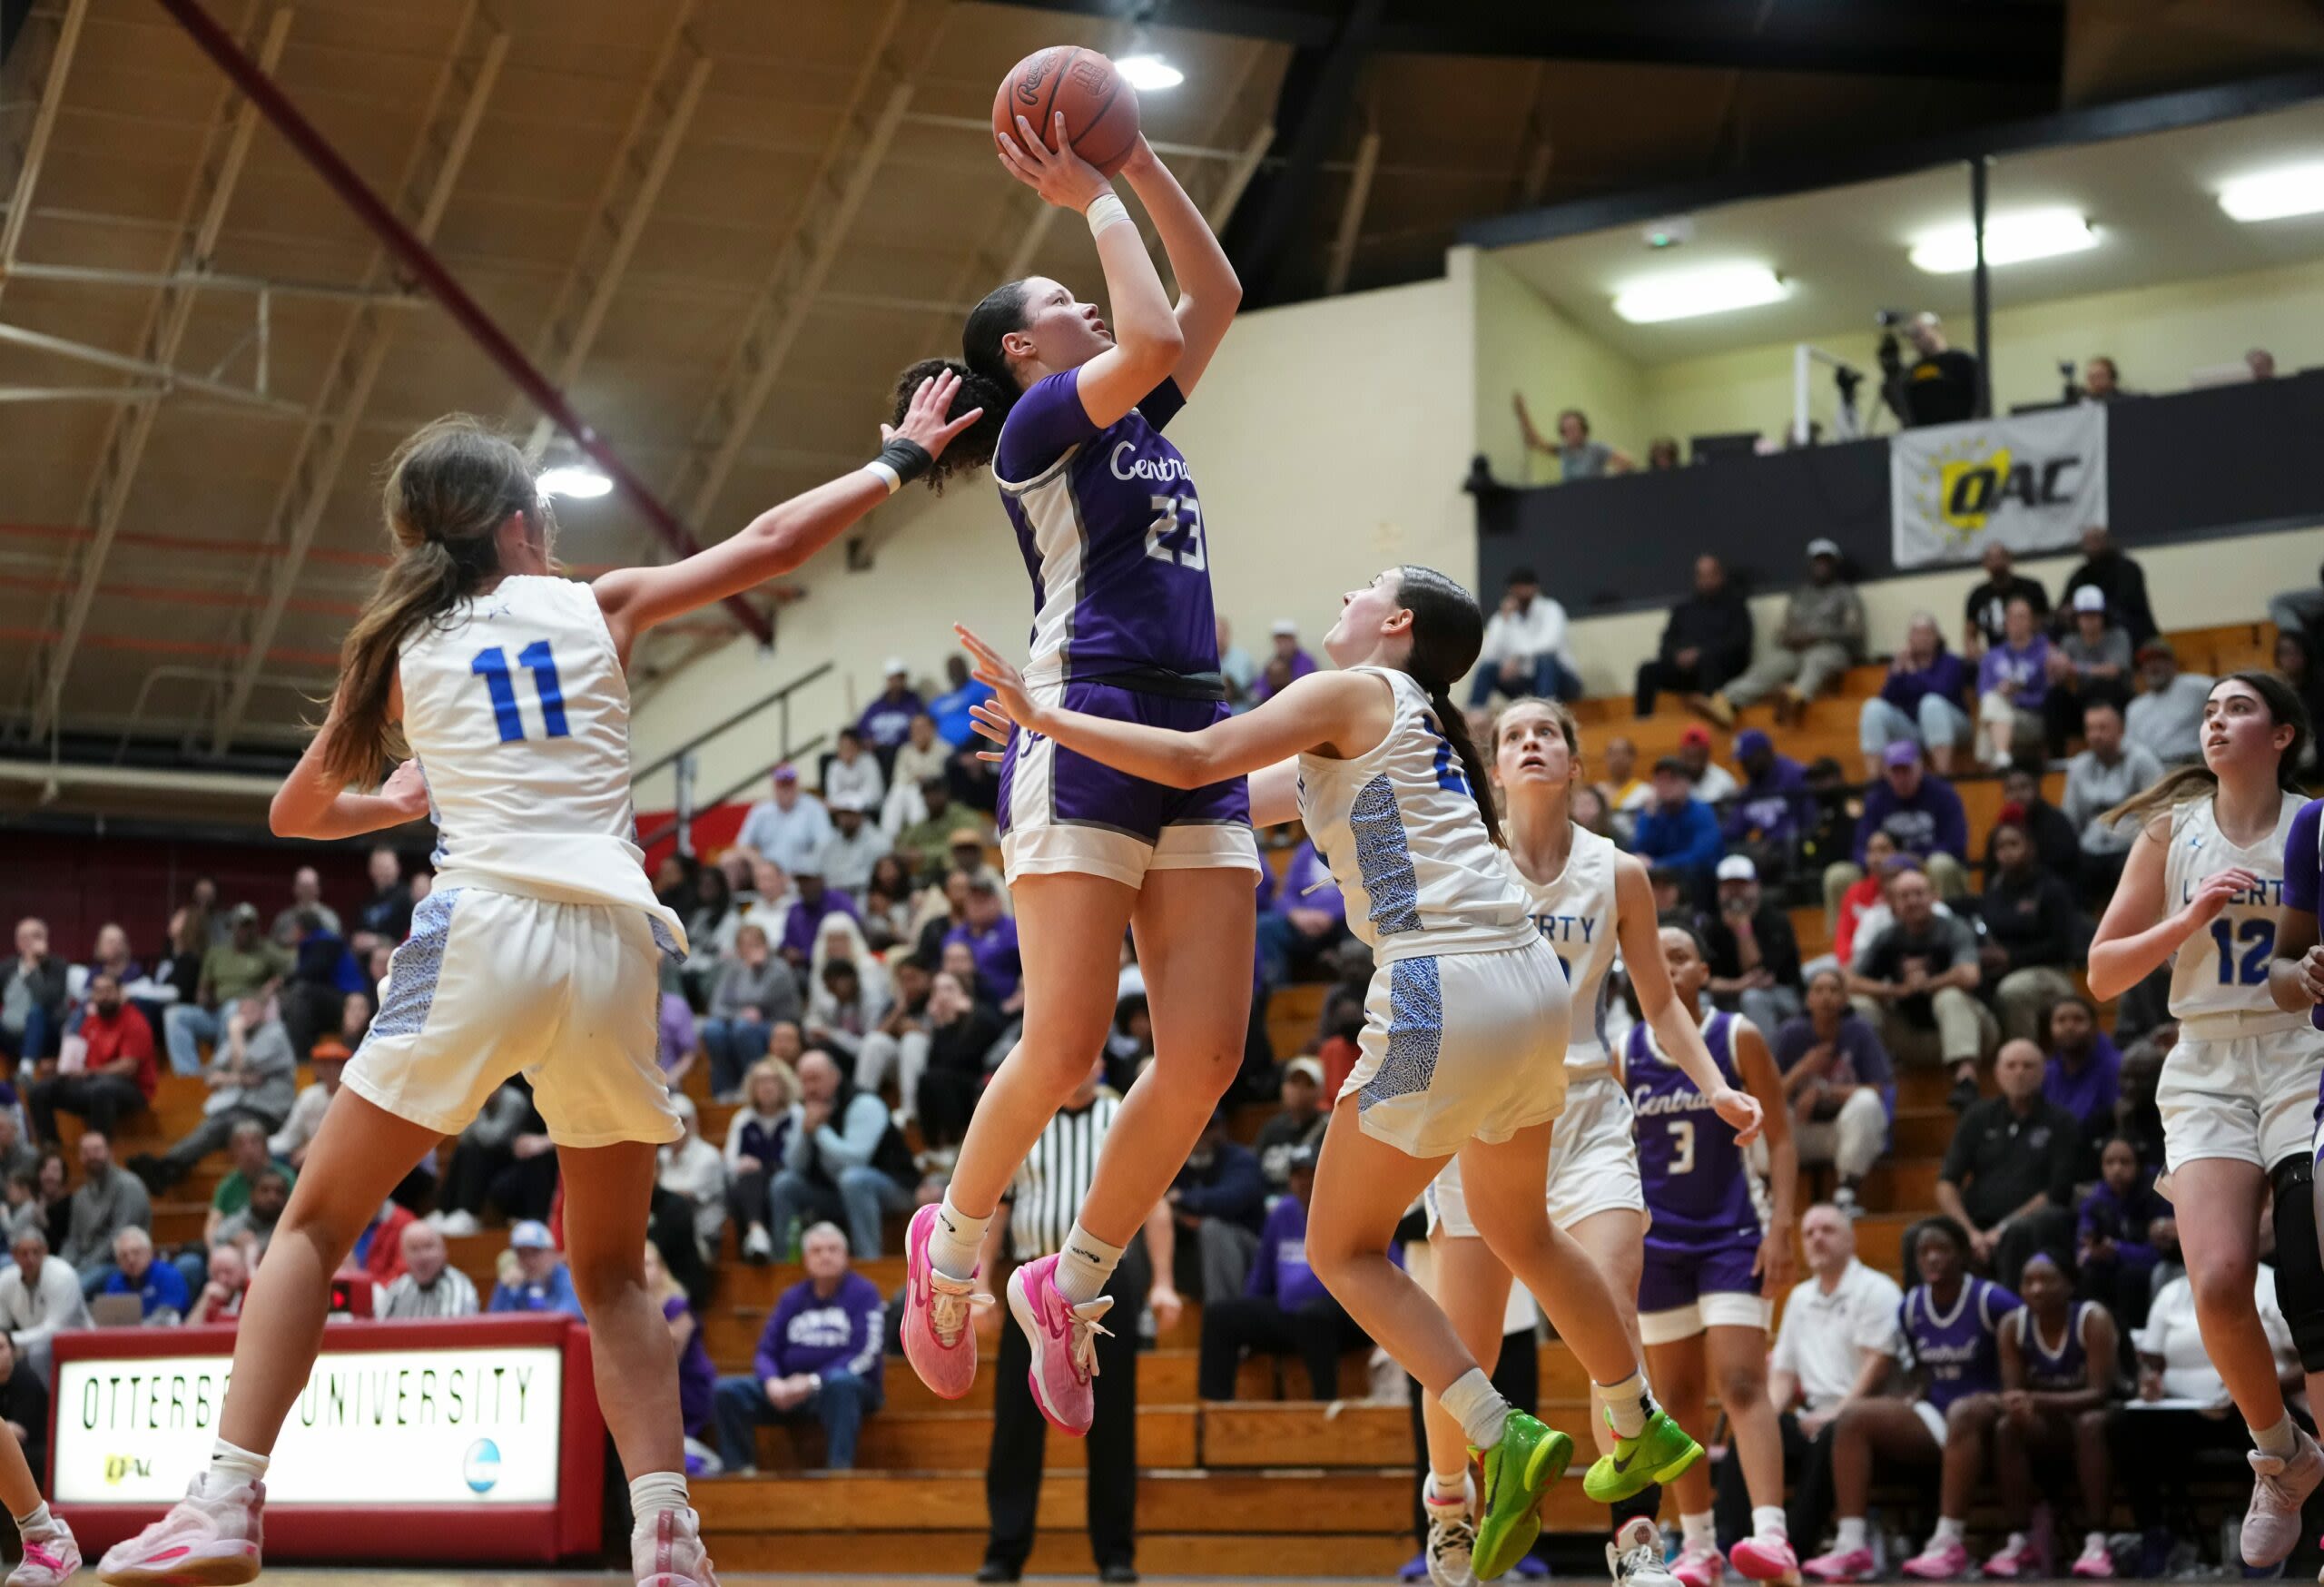 USA TODAY High School Sports Awards unveils Girls Basketball Player of the Year nominees